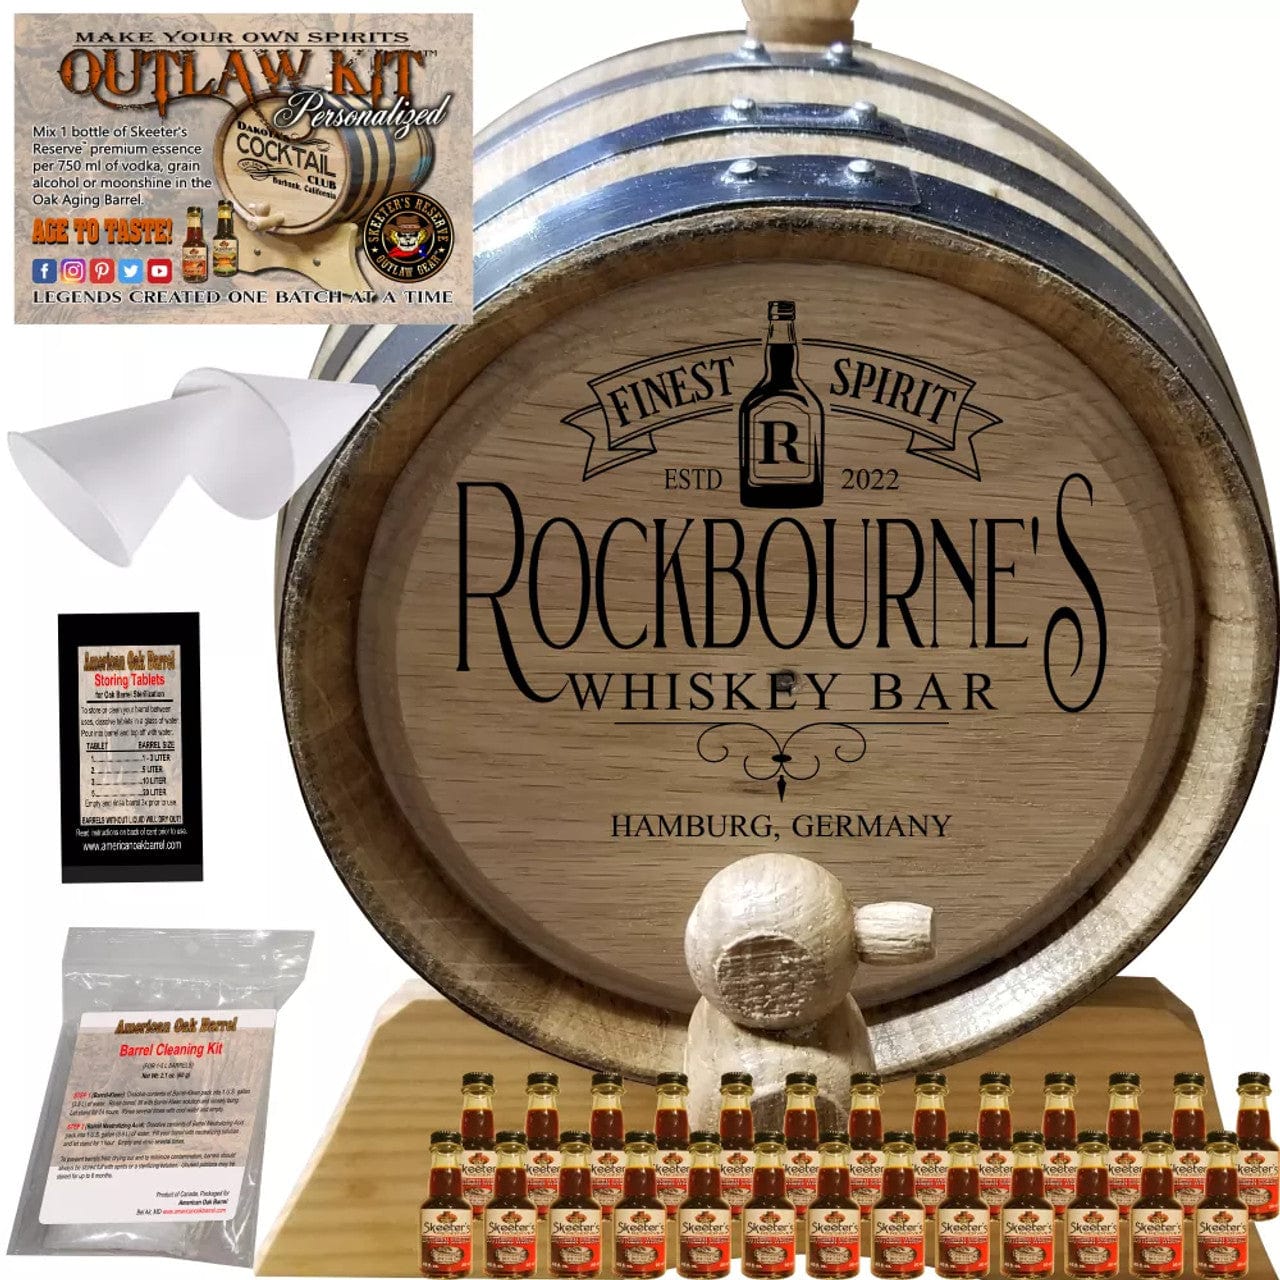 American Oak Barrel Engrave Barrels 1 Liter (.26 gallon) / Tennessee Bourbon / None American Oak Barrel Personalized Outlaw Kit™ (213) My Whiskey Bar - Create Your Own Spirits in Tennessee Bourbon